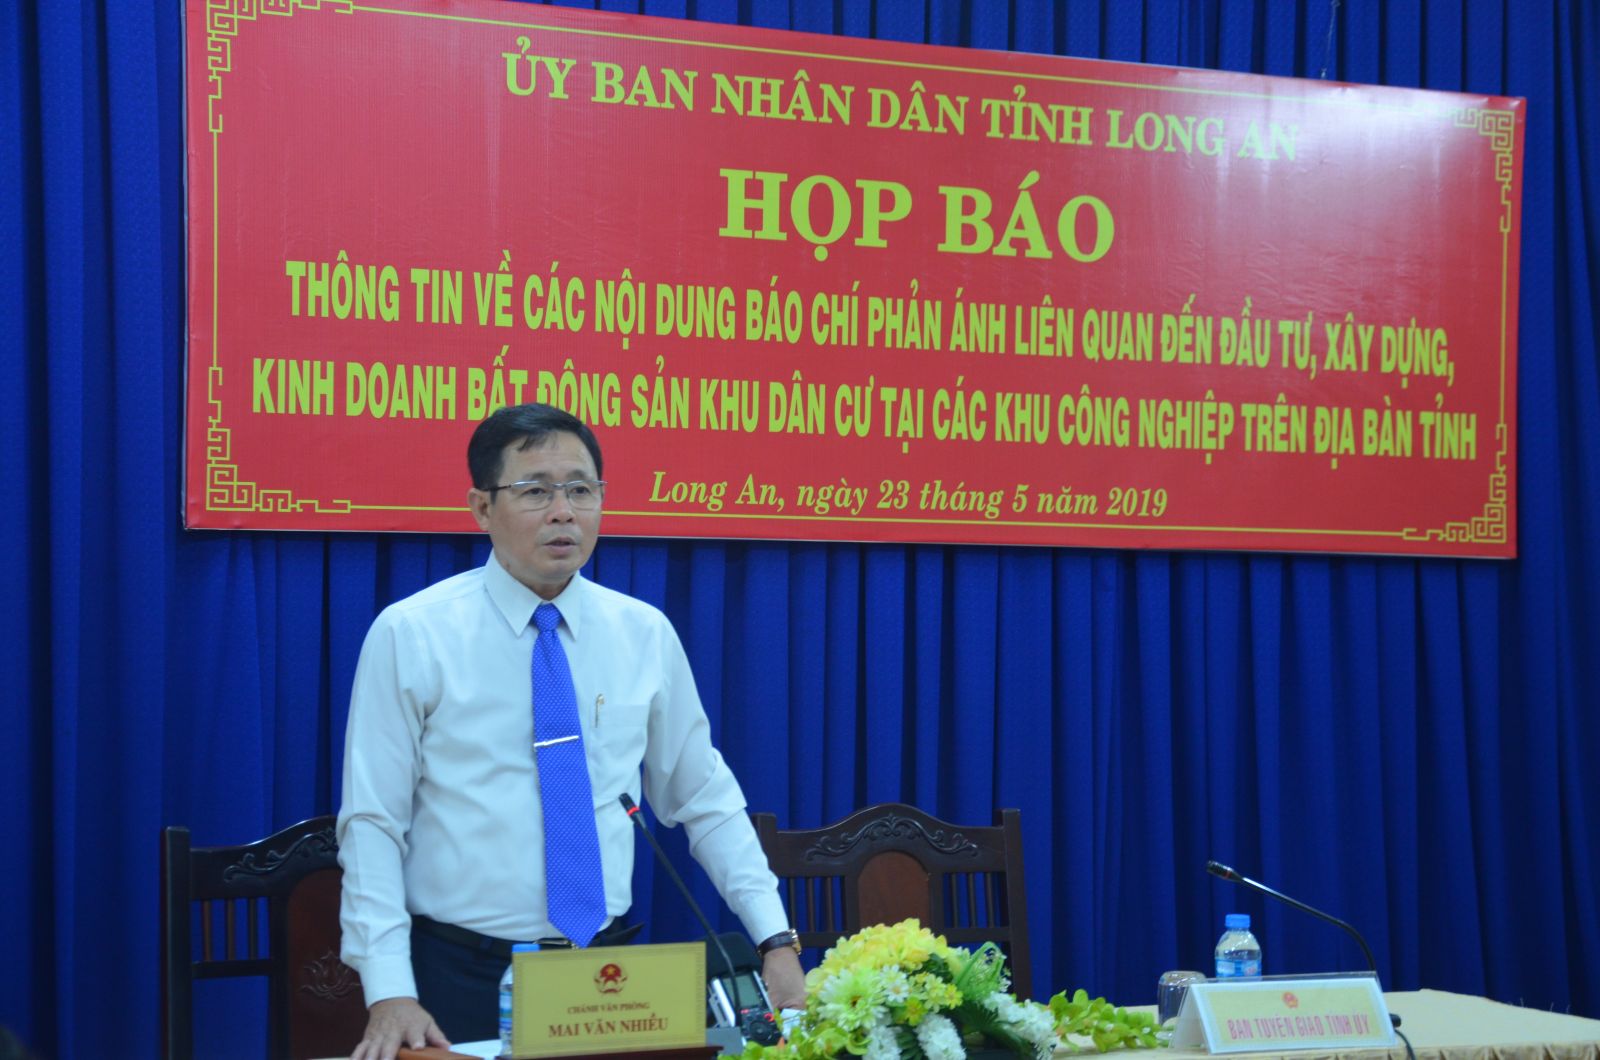 Mr. Mai Van Nhieu chairs the press conference